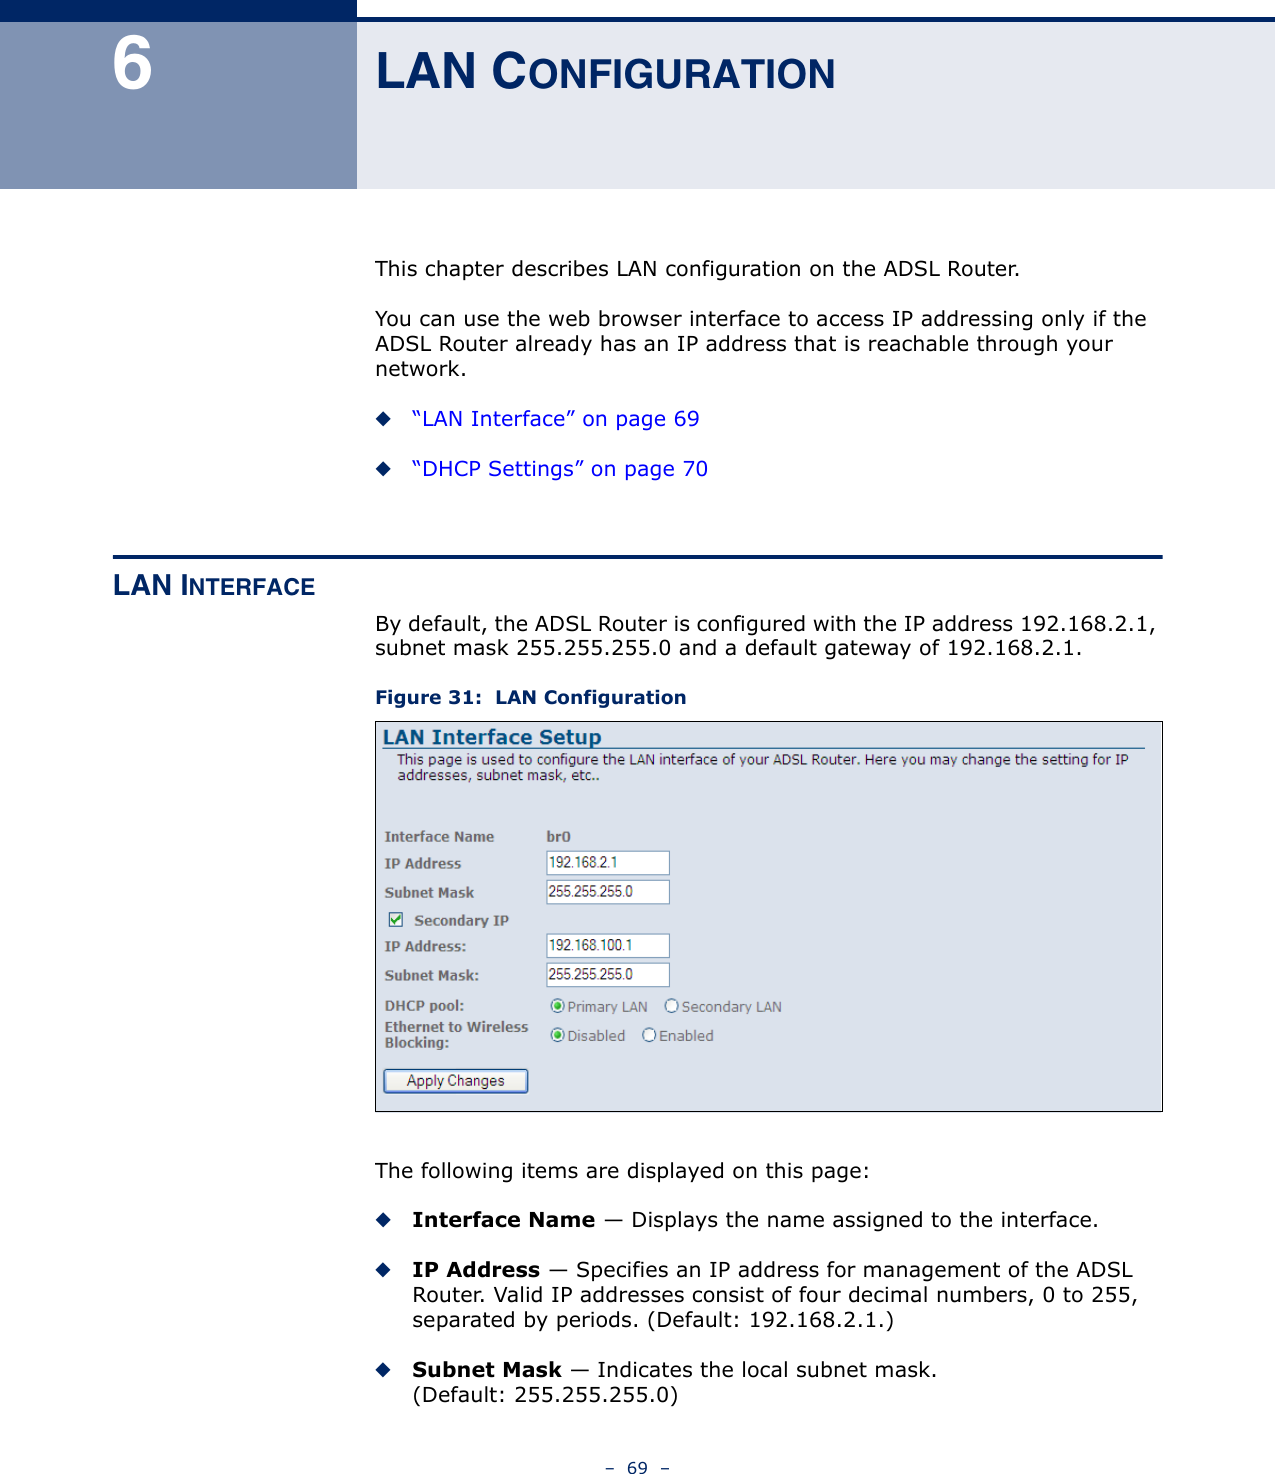 –  69  –6LAN CONFIGURATIONThis chapter describes LAN configuration on the ADSL Router. You can use the web browser interface to access IP addressing only if the ADSL Router already has an IP address that is reachable through your network. ◆“LAN Interface” on page 69◆“DHCP Settings” on page 70LAN INTERFACEBy default, the ADSL Router is configured with the IP address 192.168.2.1, subnet mask 255.255.255.0 and a default gateway of 192.168.2.1. Figure 31:  LAN ConfigurationThe following items are displayed on this page:◆Interface Name — Displays the name assigned to the interface.◆IP Address — Specifies an IP address for management of the ADSL Router. Valid IP addresses consist of four decimal numbers, 0 to 255, separated by periods. (Default: 192.168.2.1.)◆Subnet Mask — Indicates the local subnet mask. (Default: 255.255.255.0)